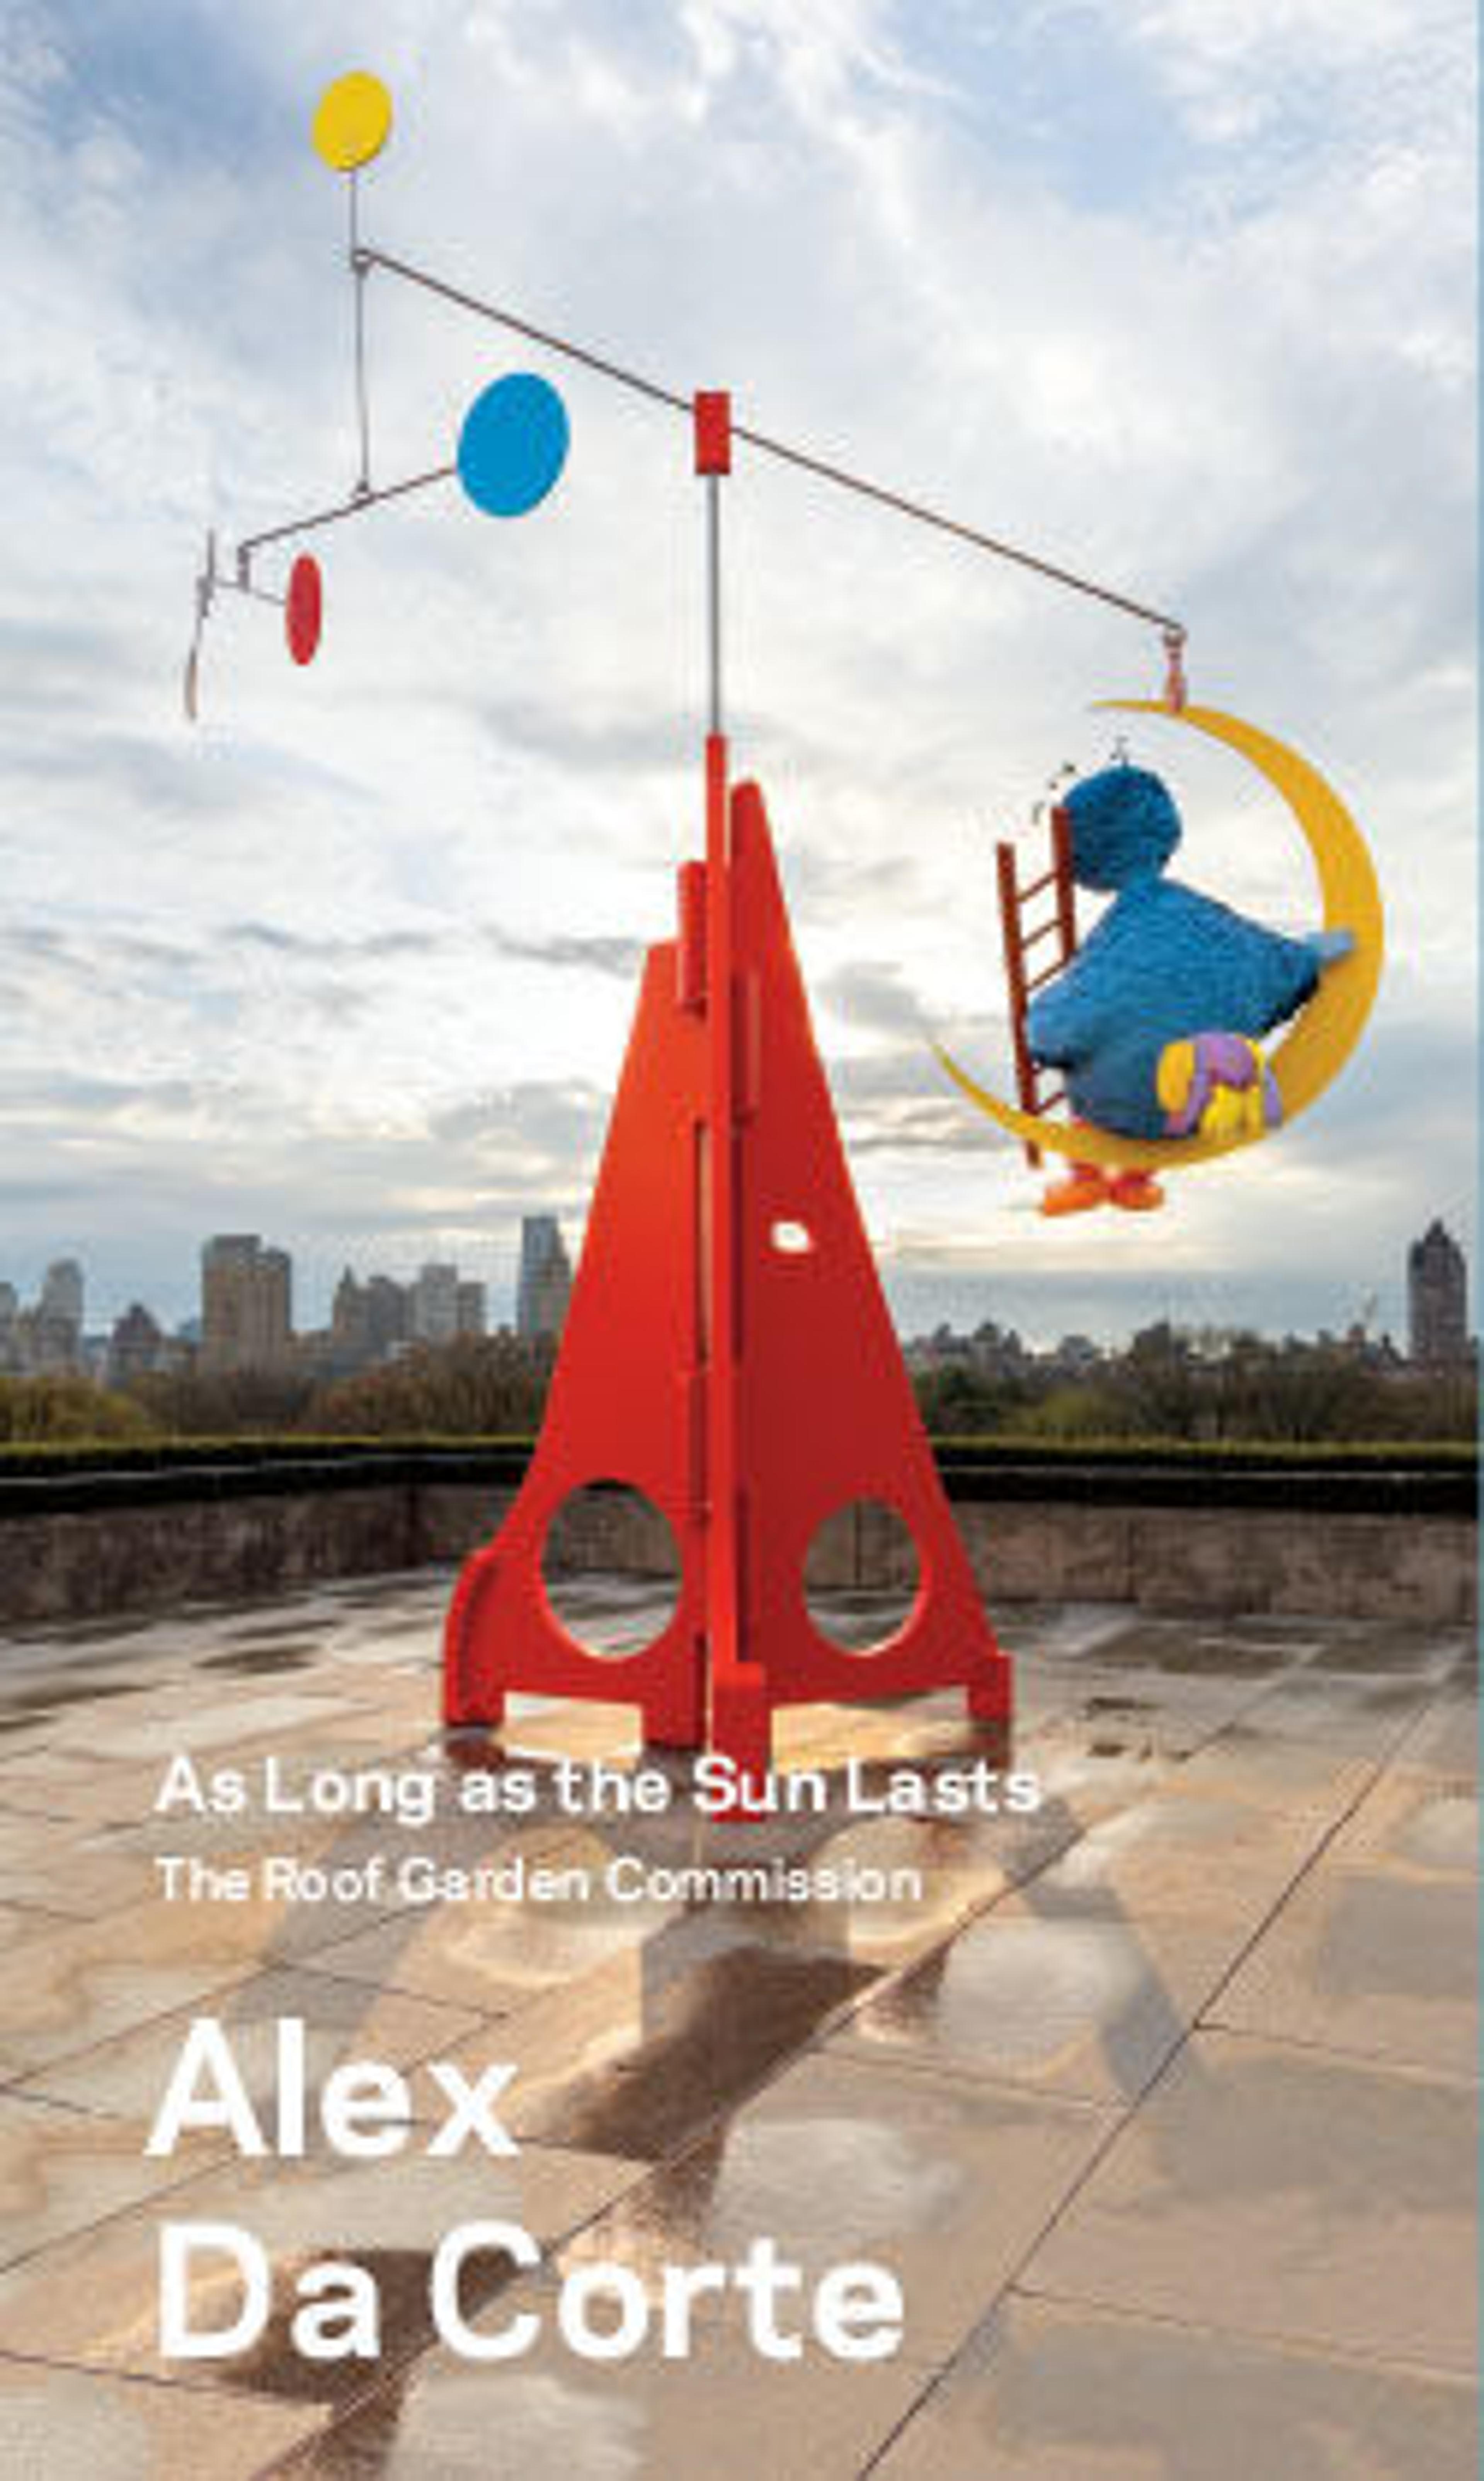 The cover of the publication "The Roof Garden Commission: Alex Da Corte: As Long as the Sun Lasts" showing a blue version of the Big Bird character from "Sesame Street" seated on a large mobile against the skyline of New York City